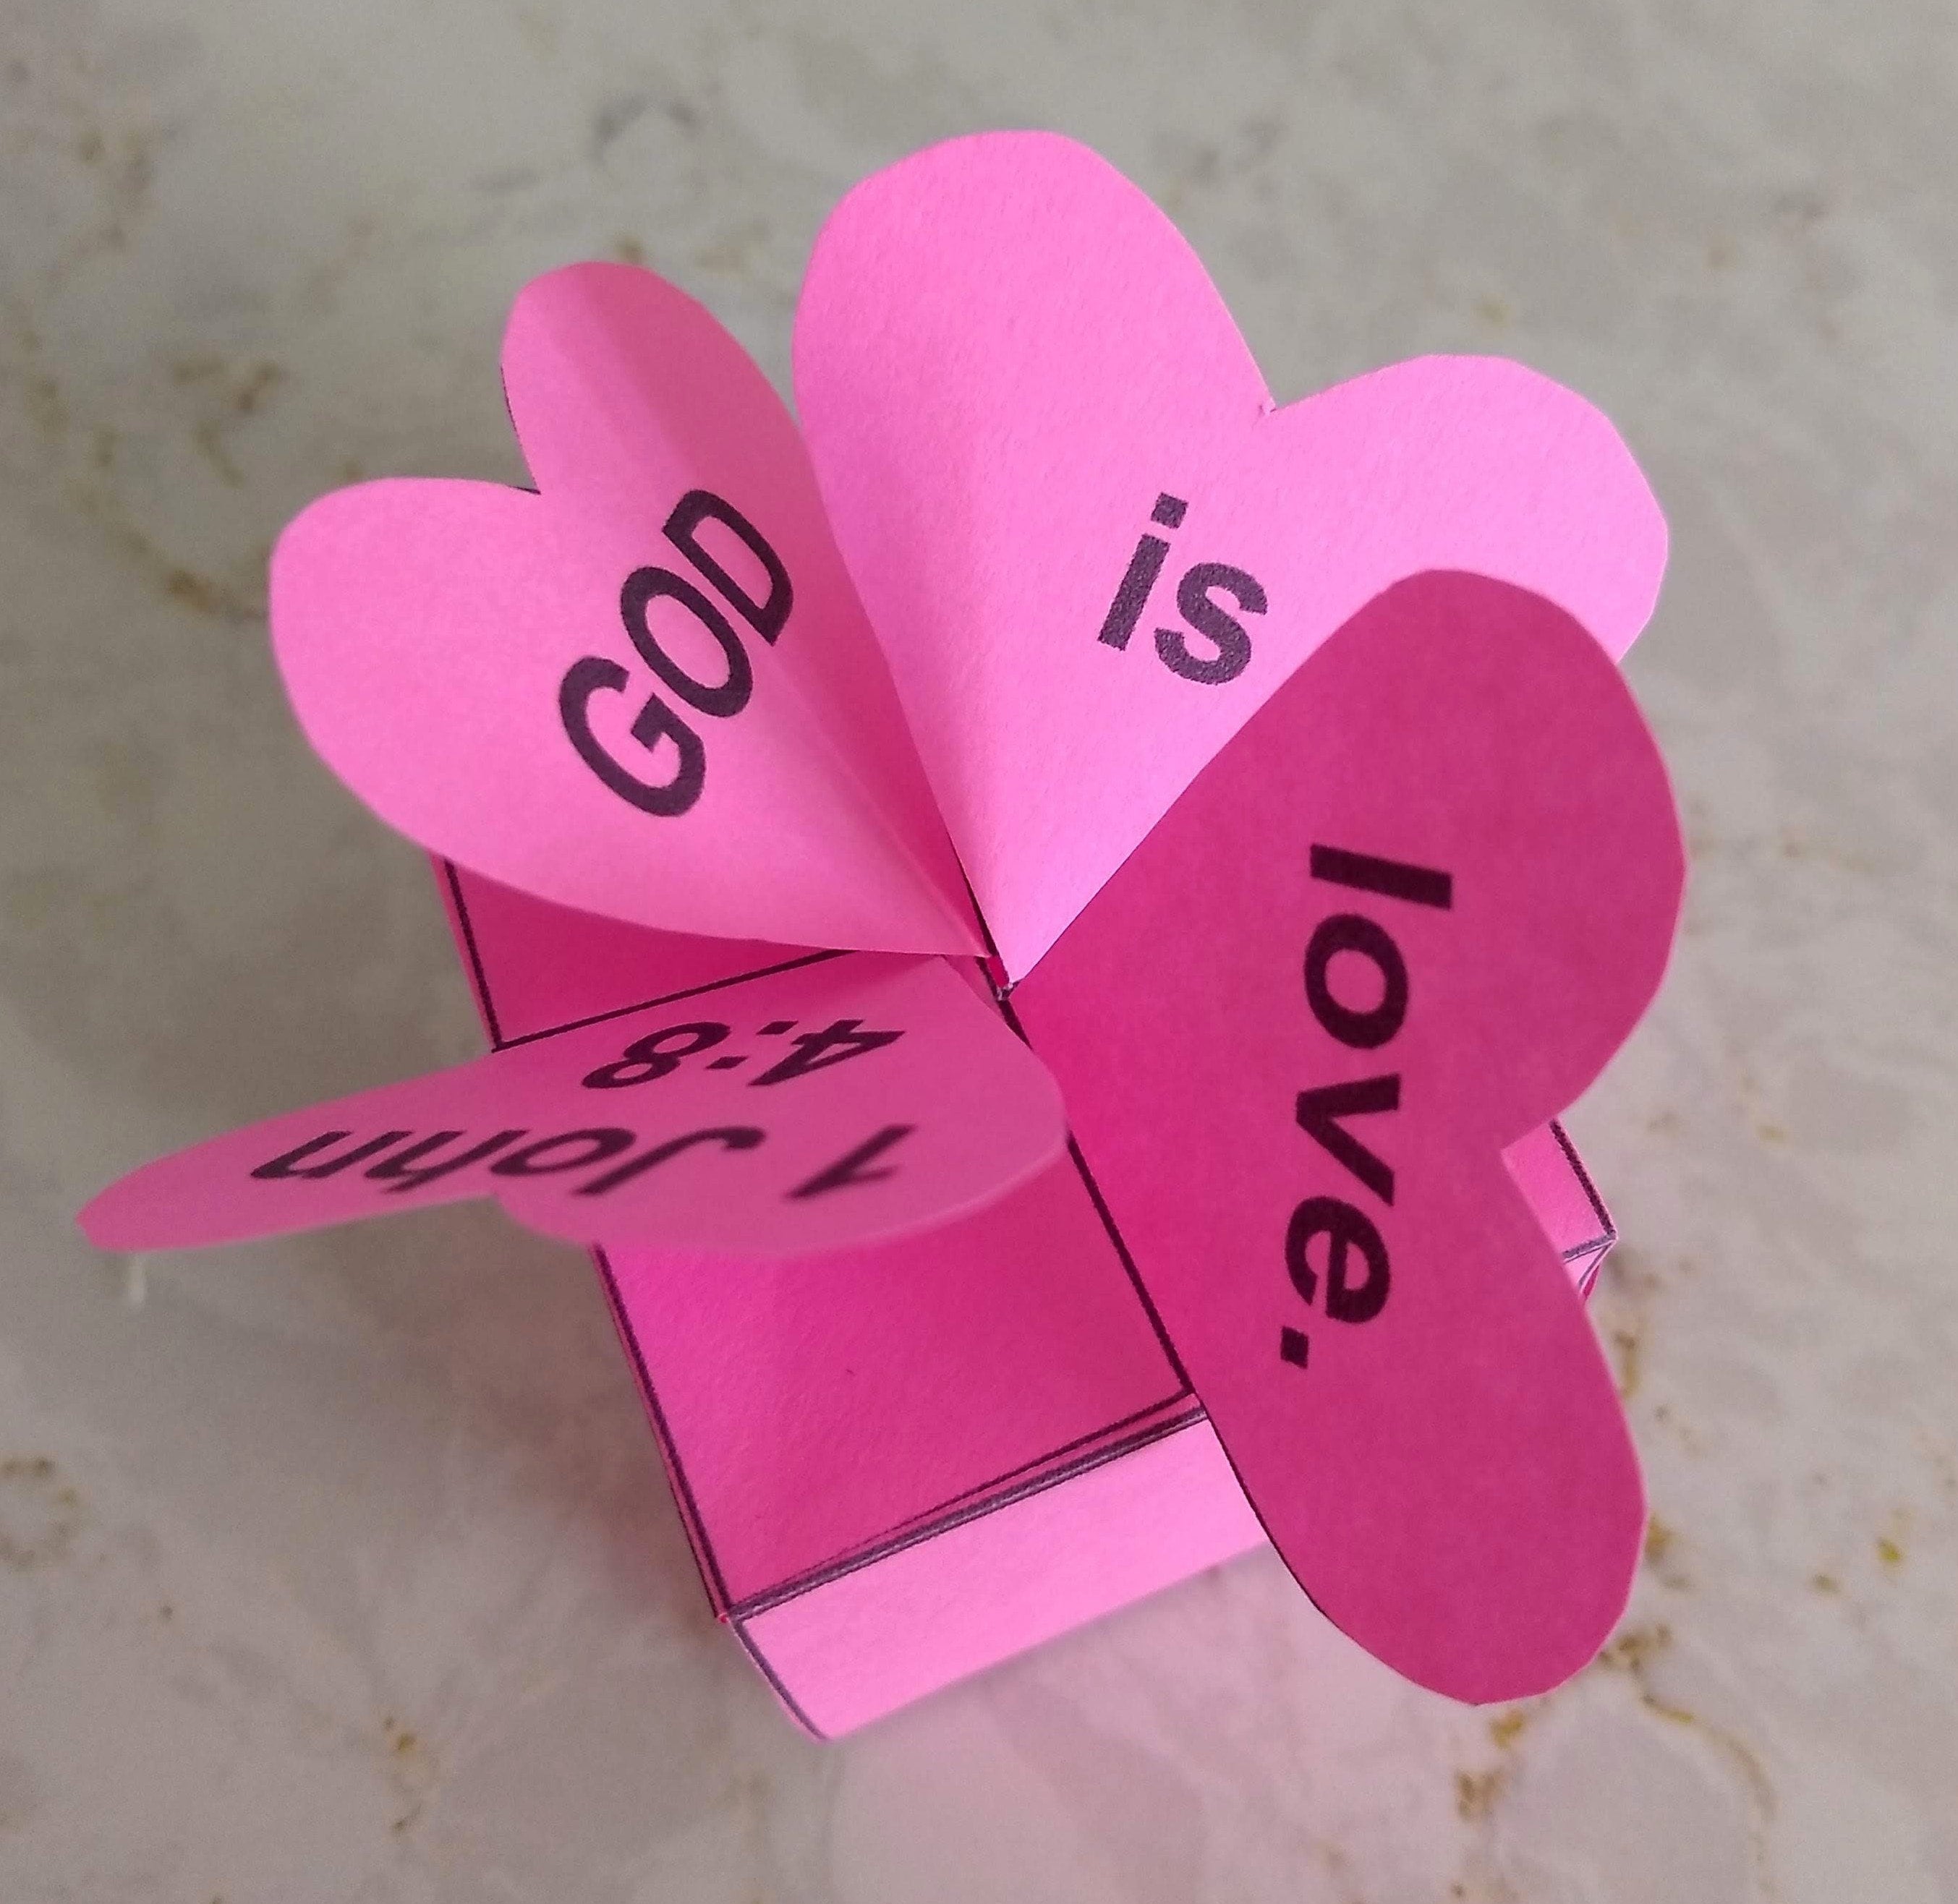 26 Heart Crafts for Sunday School - The Activity Mom